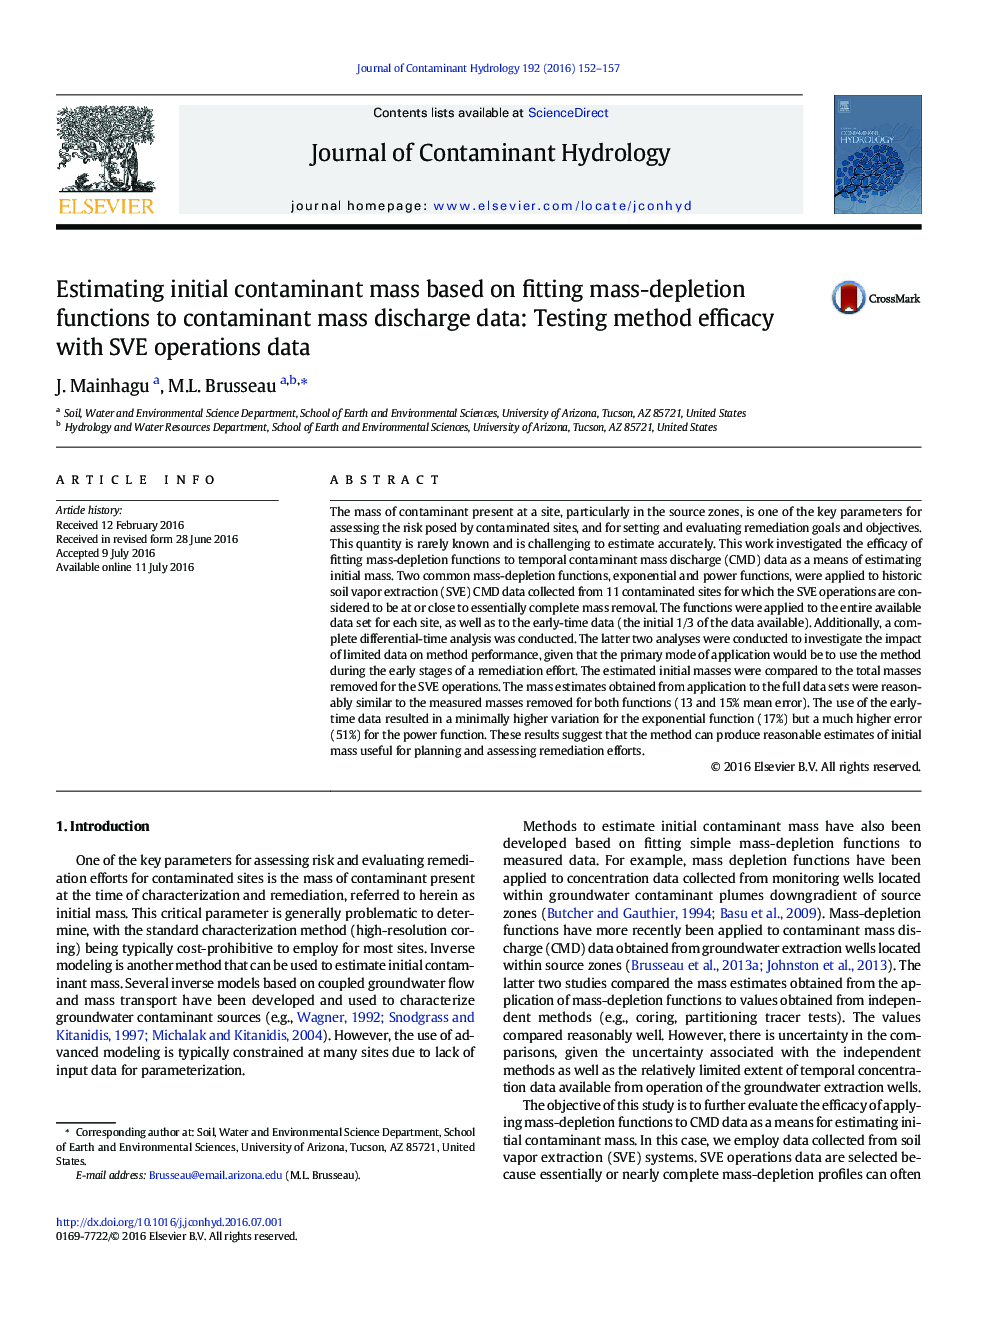 Estimating initial contaminant mass based on fitting mass-depletion functions to contaminant mass discharge data: Testing method efficacy with SVE operations data